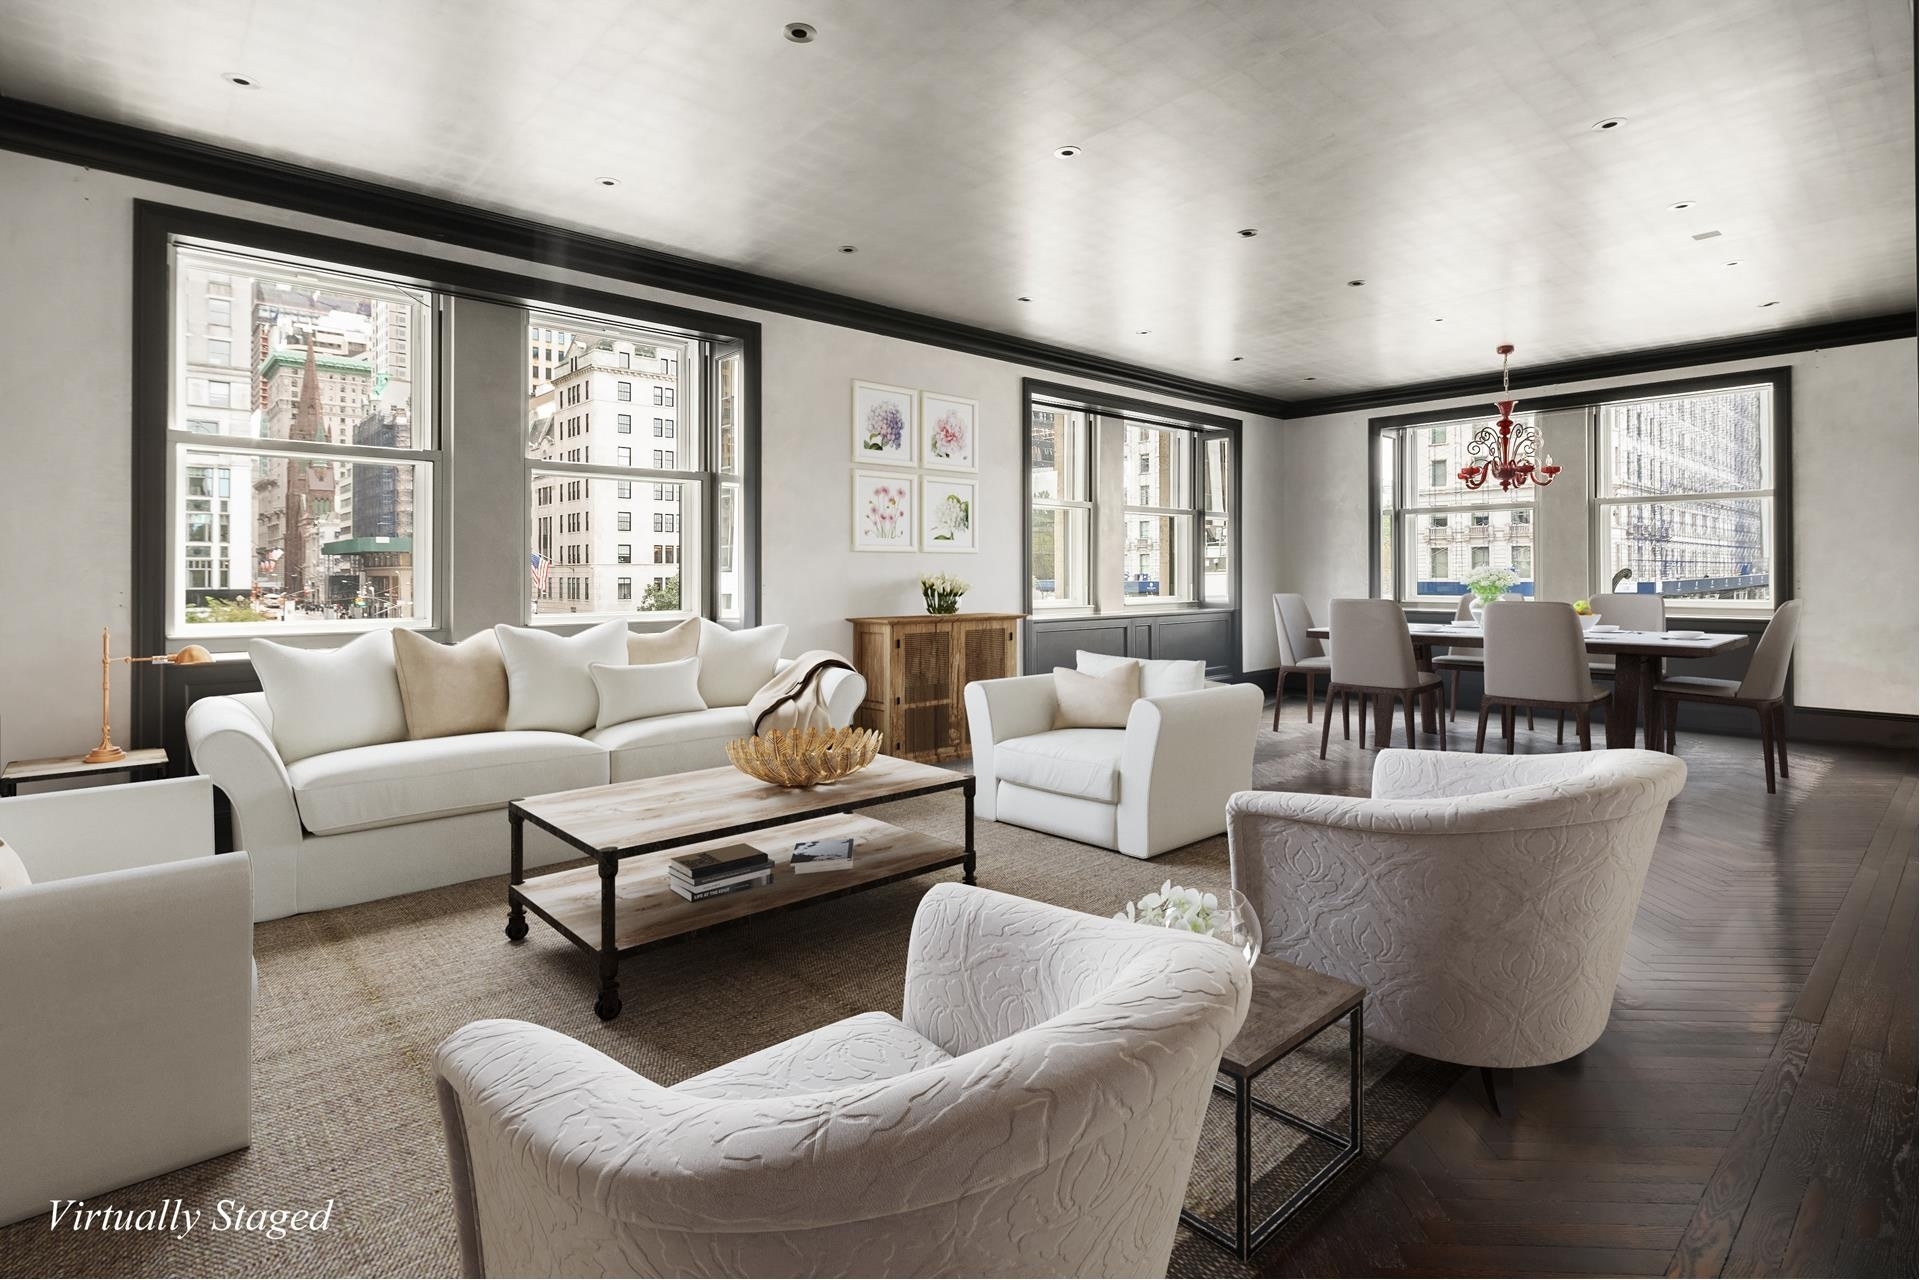 Co-op Properties for Sale at Sherry Netherland, 781 FIFTH AVE, 204/206 Lenox Hill, New York, NY 10022